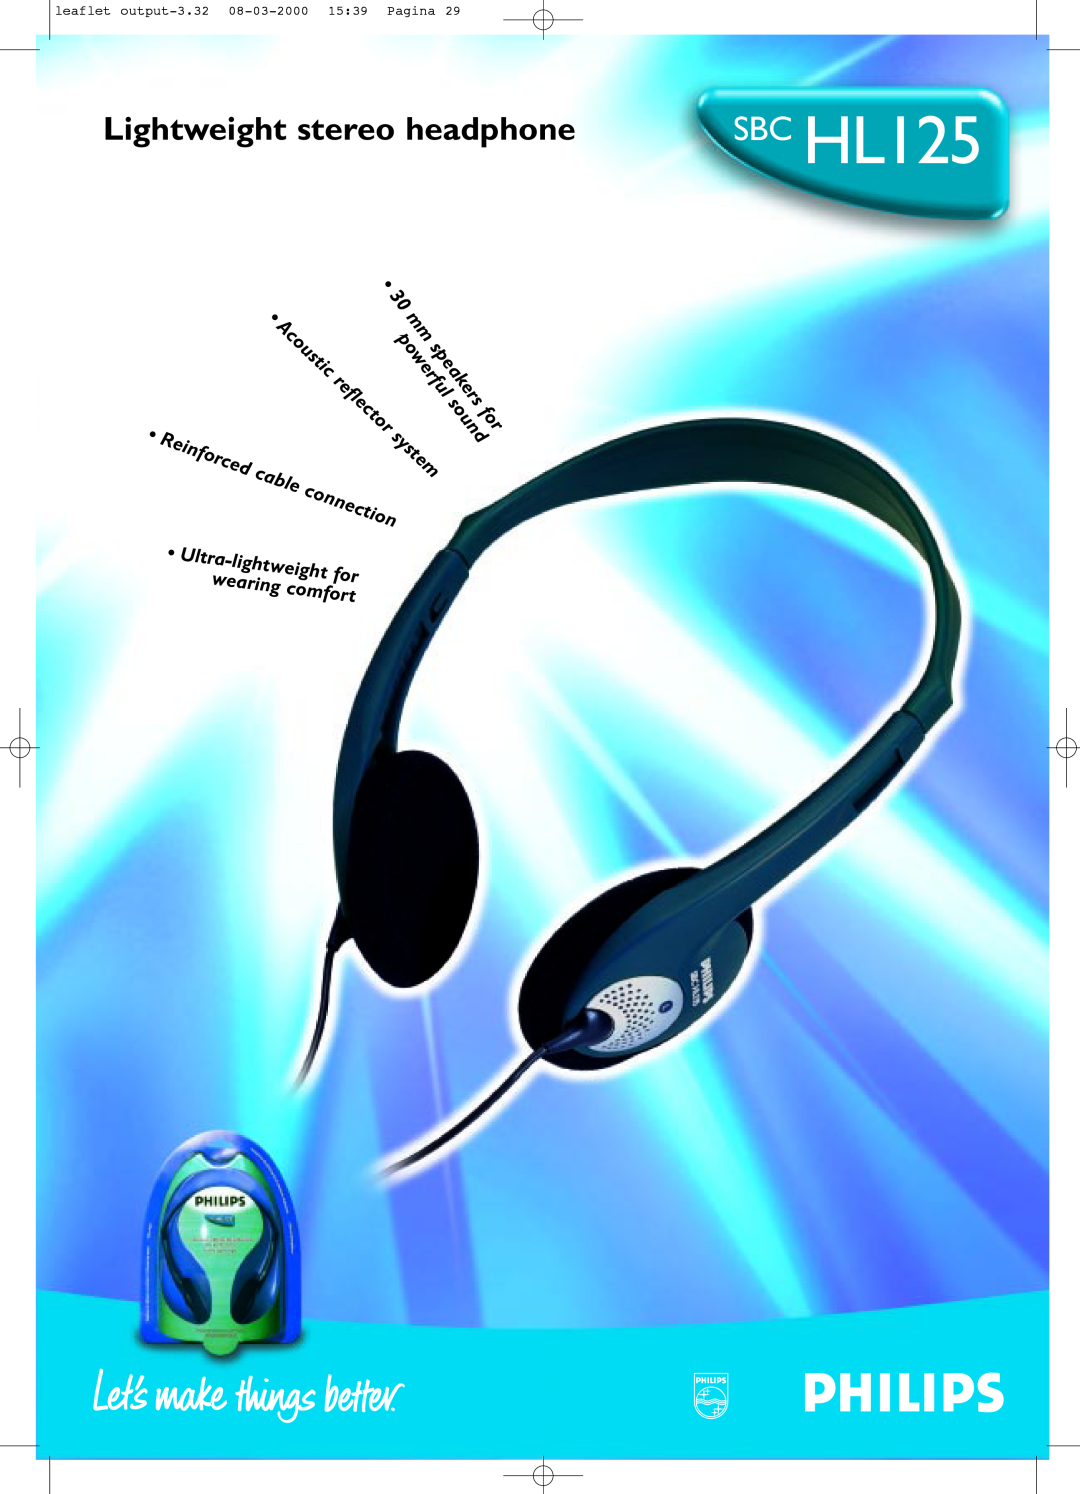 Philips manual SBC HL125, Lightweight stereo headphone, sound, powerful, system, Acoustic, reflector, speakers, cable 